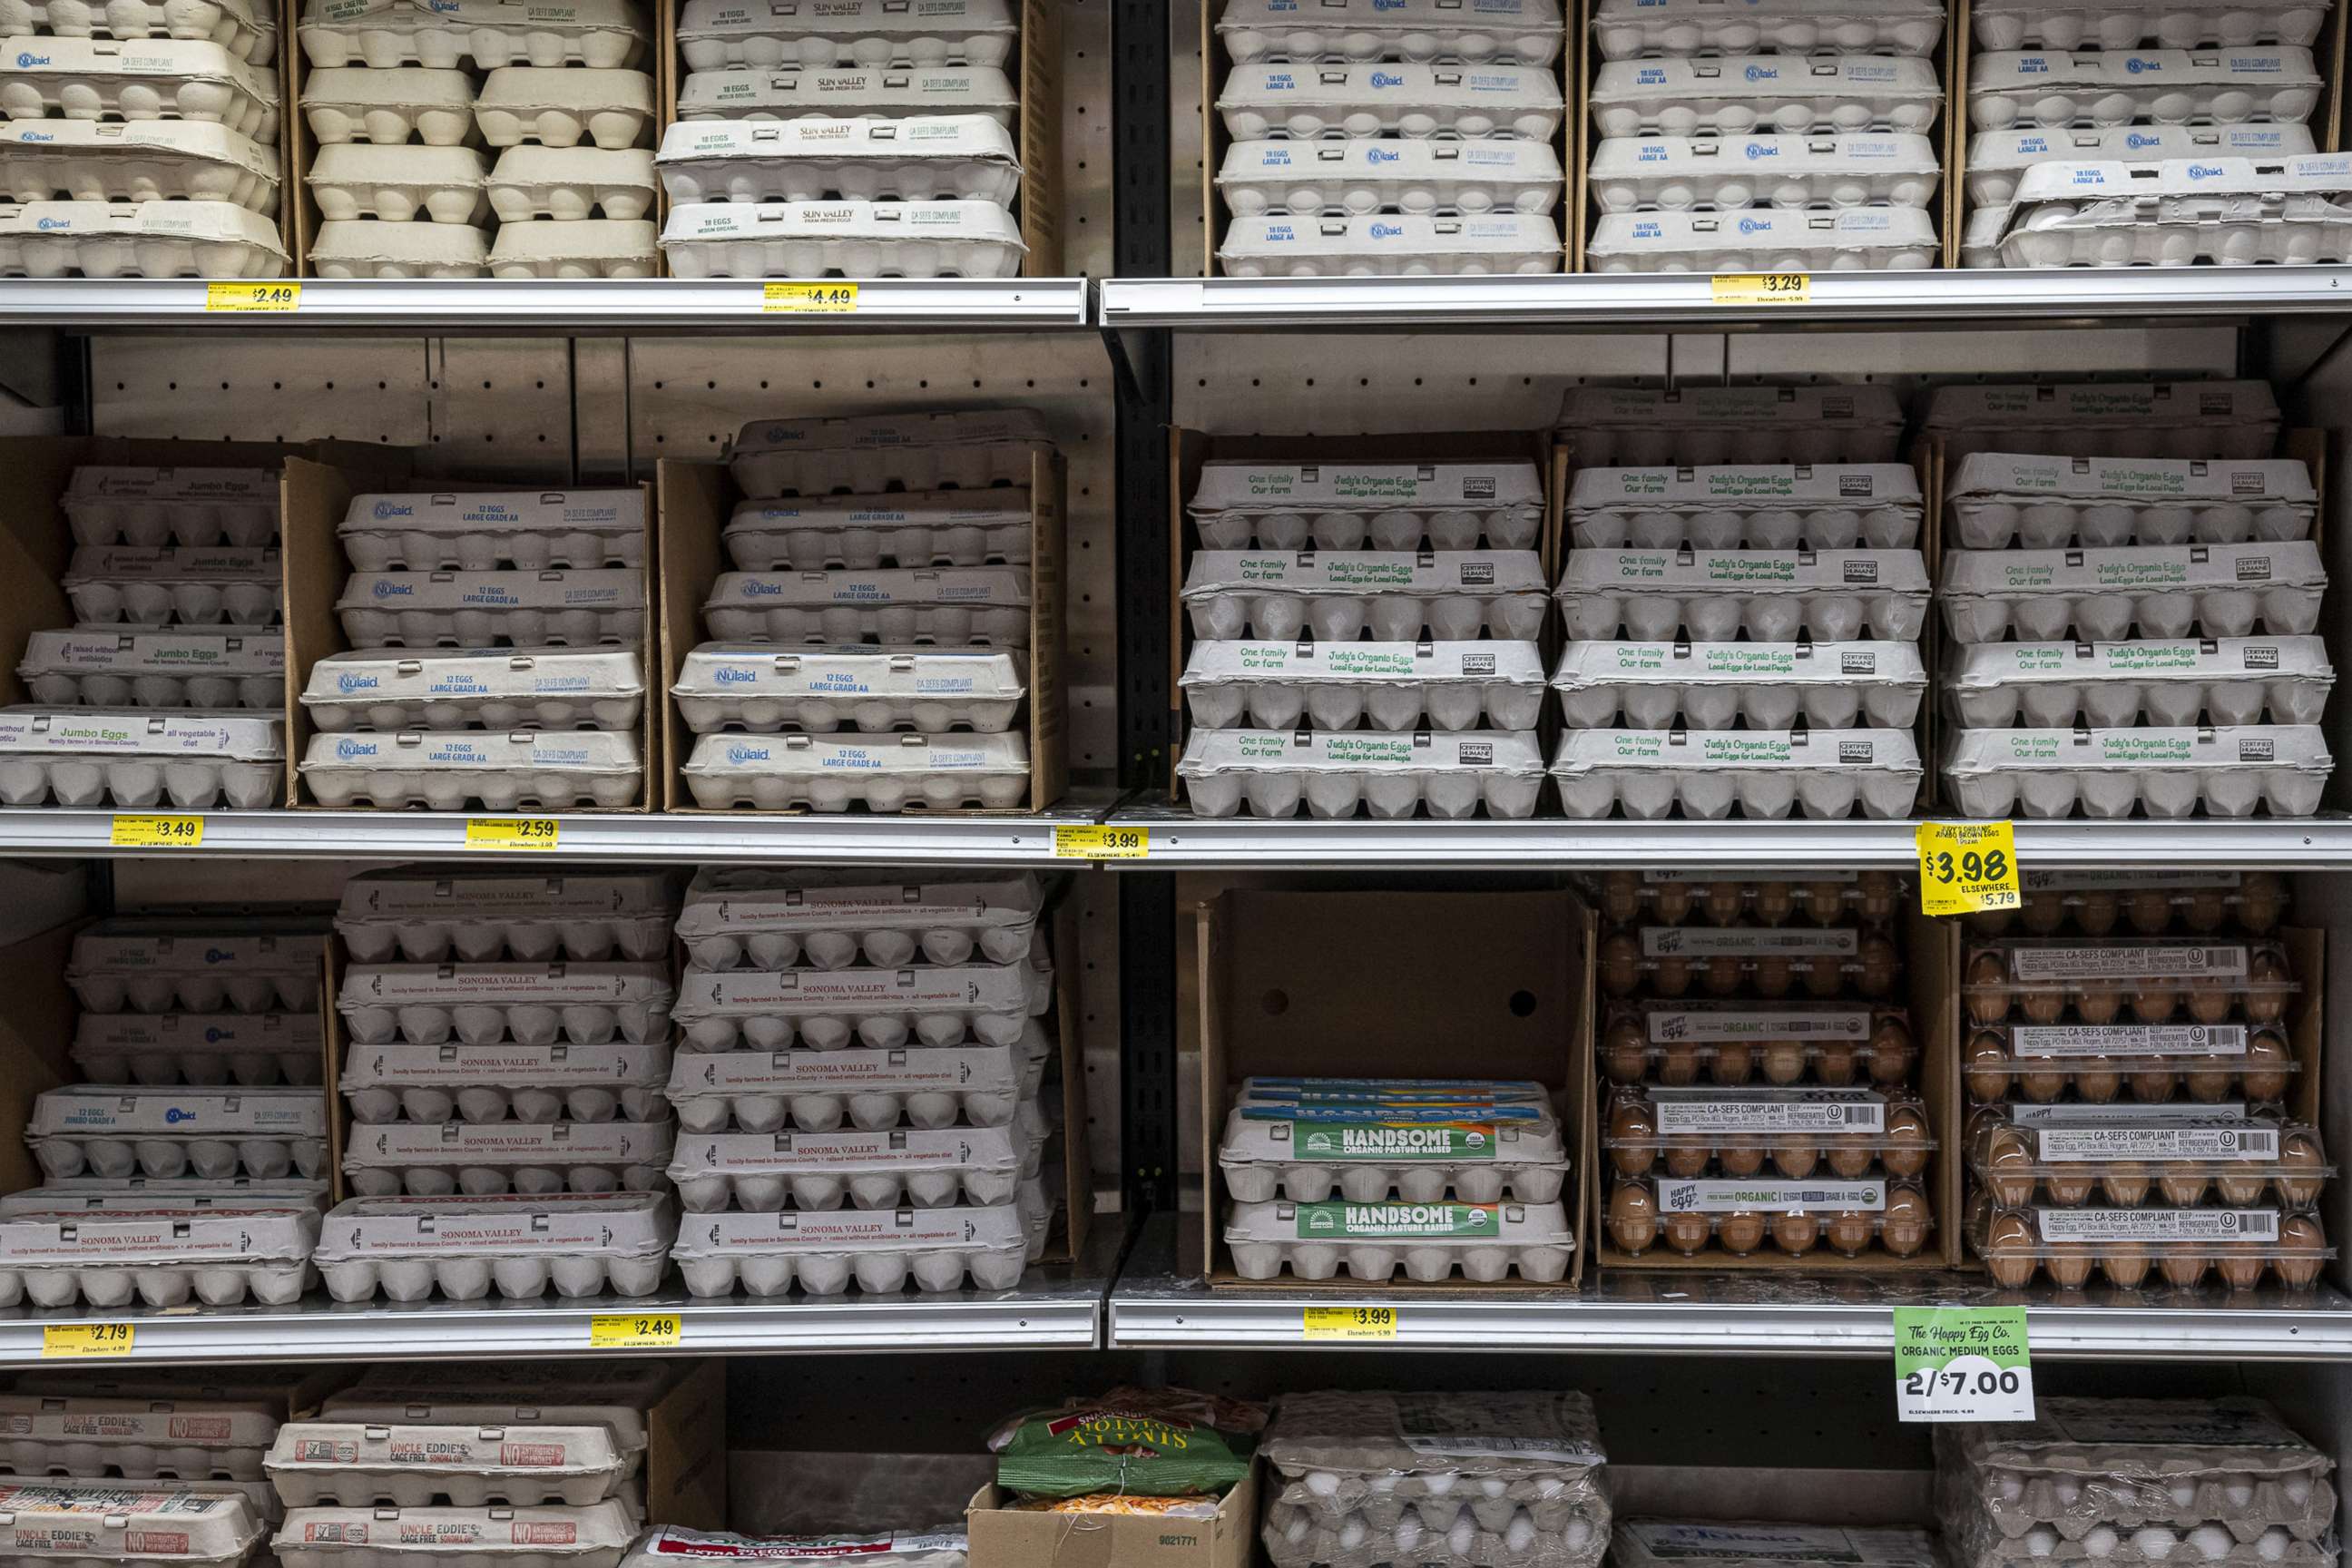 PHOTO: Cartons of eggs for sale at a grocery store in San Francisco, Calif., on Nov. 11, 2021.